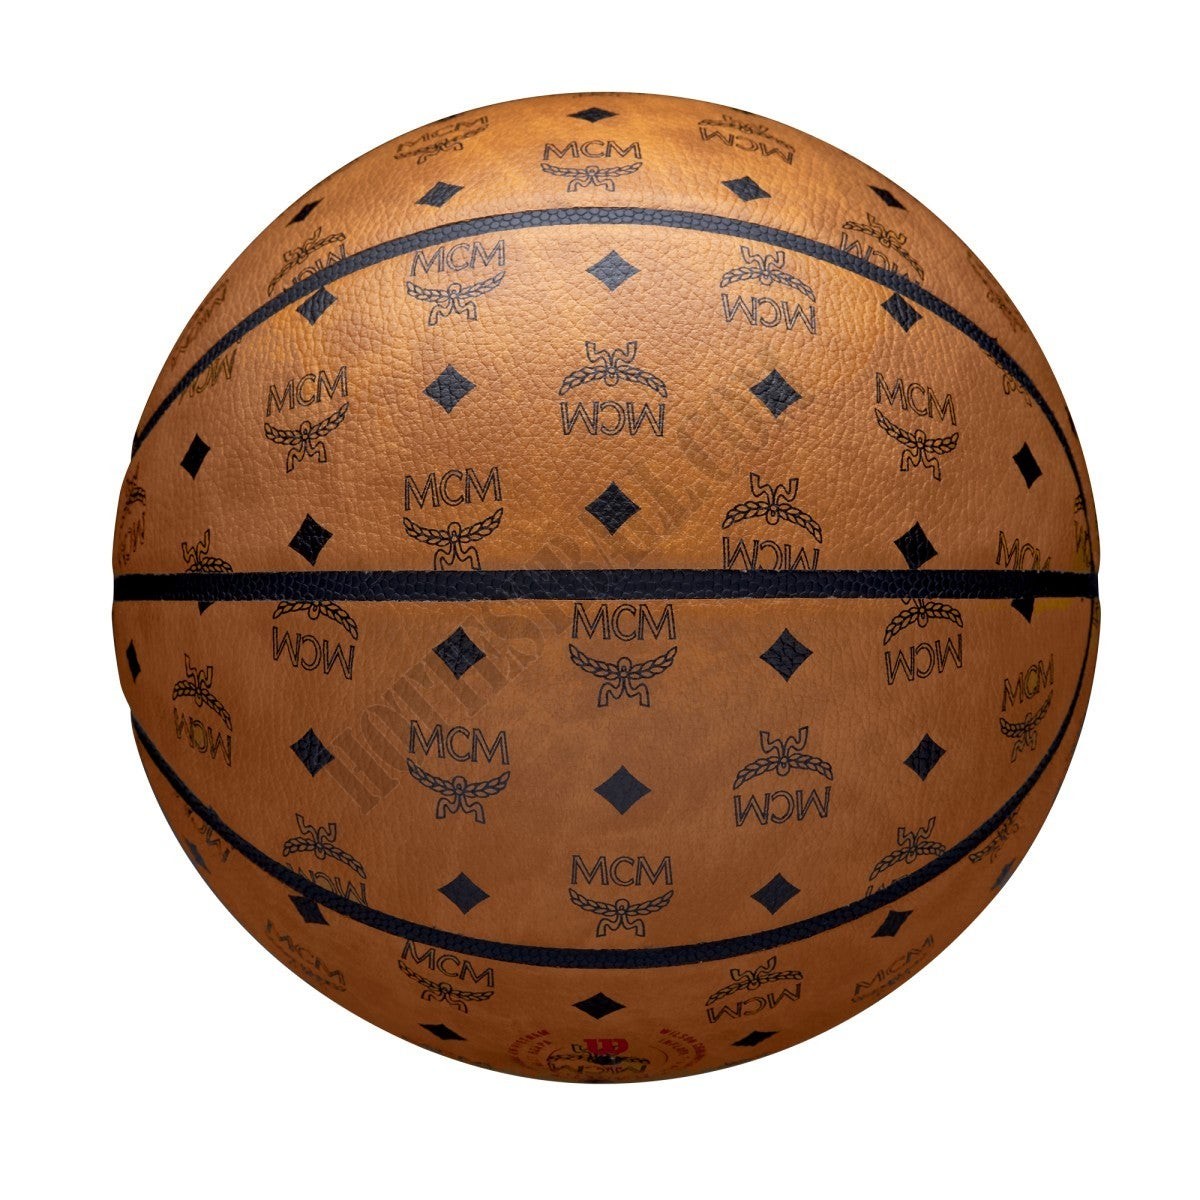 MCM x Chicago Limited Edition Basketball - Wilson Discount Store - -7